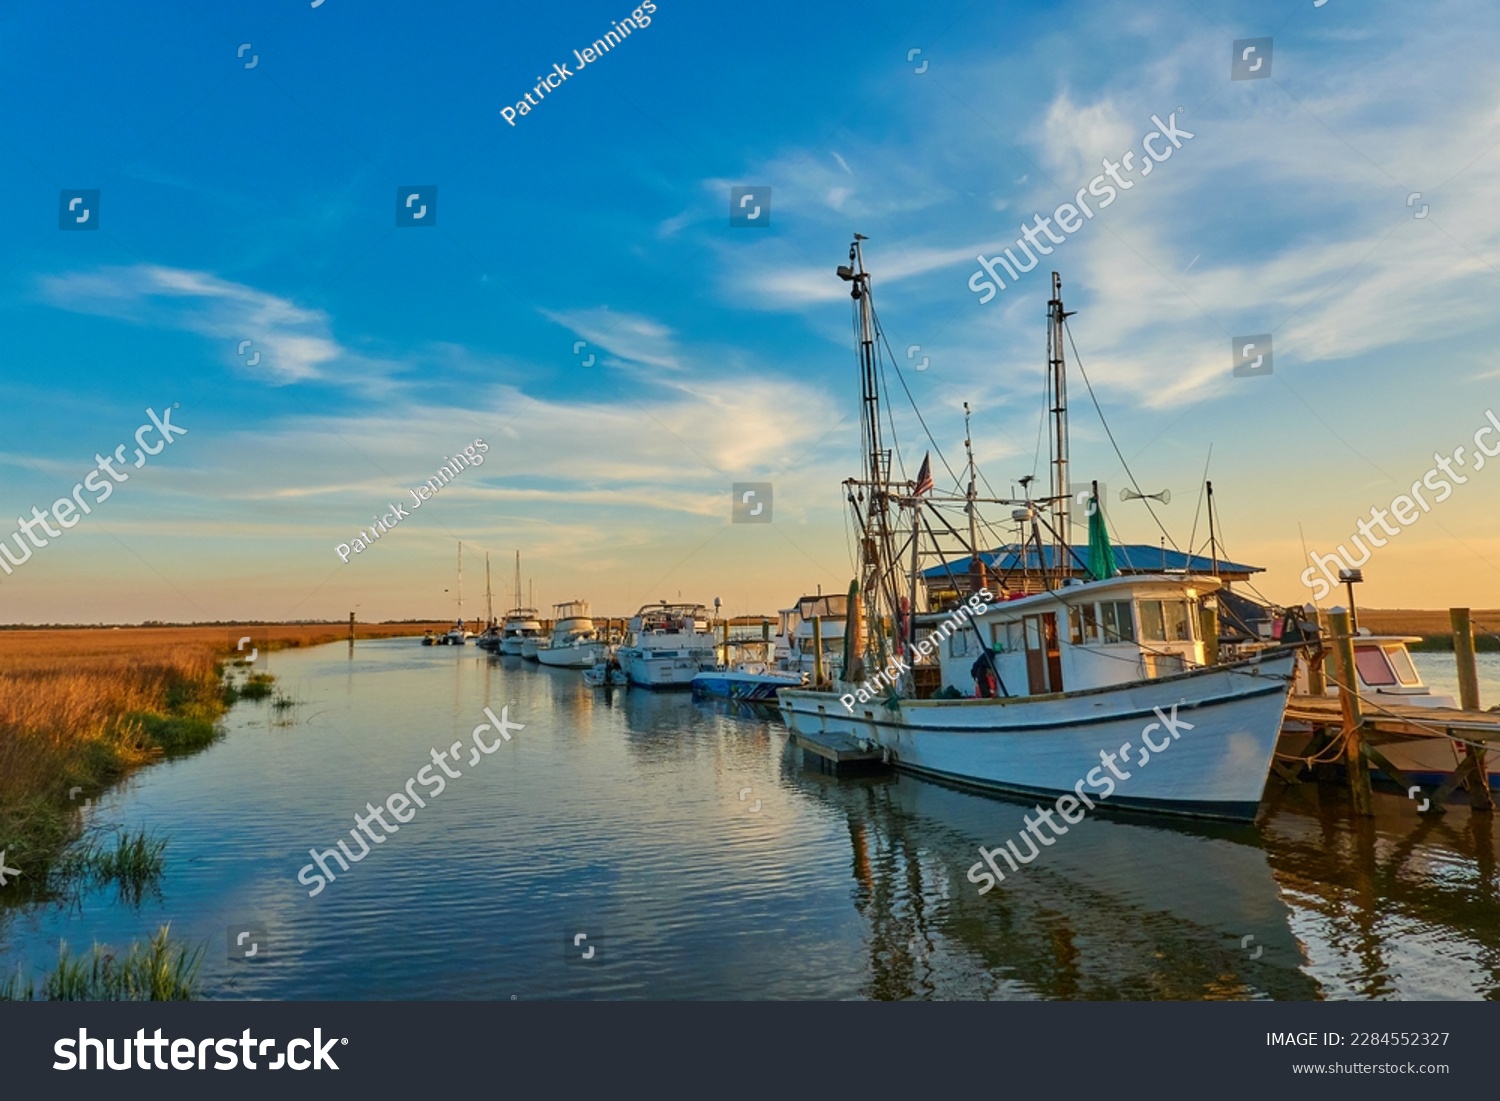 Sunset with shrimp boats along a dock at Tybee Island, Ga. #2284552327